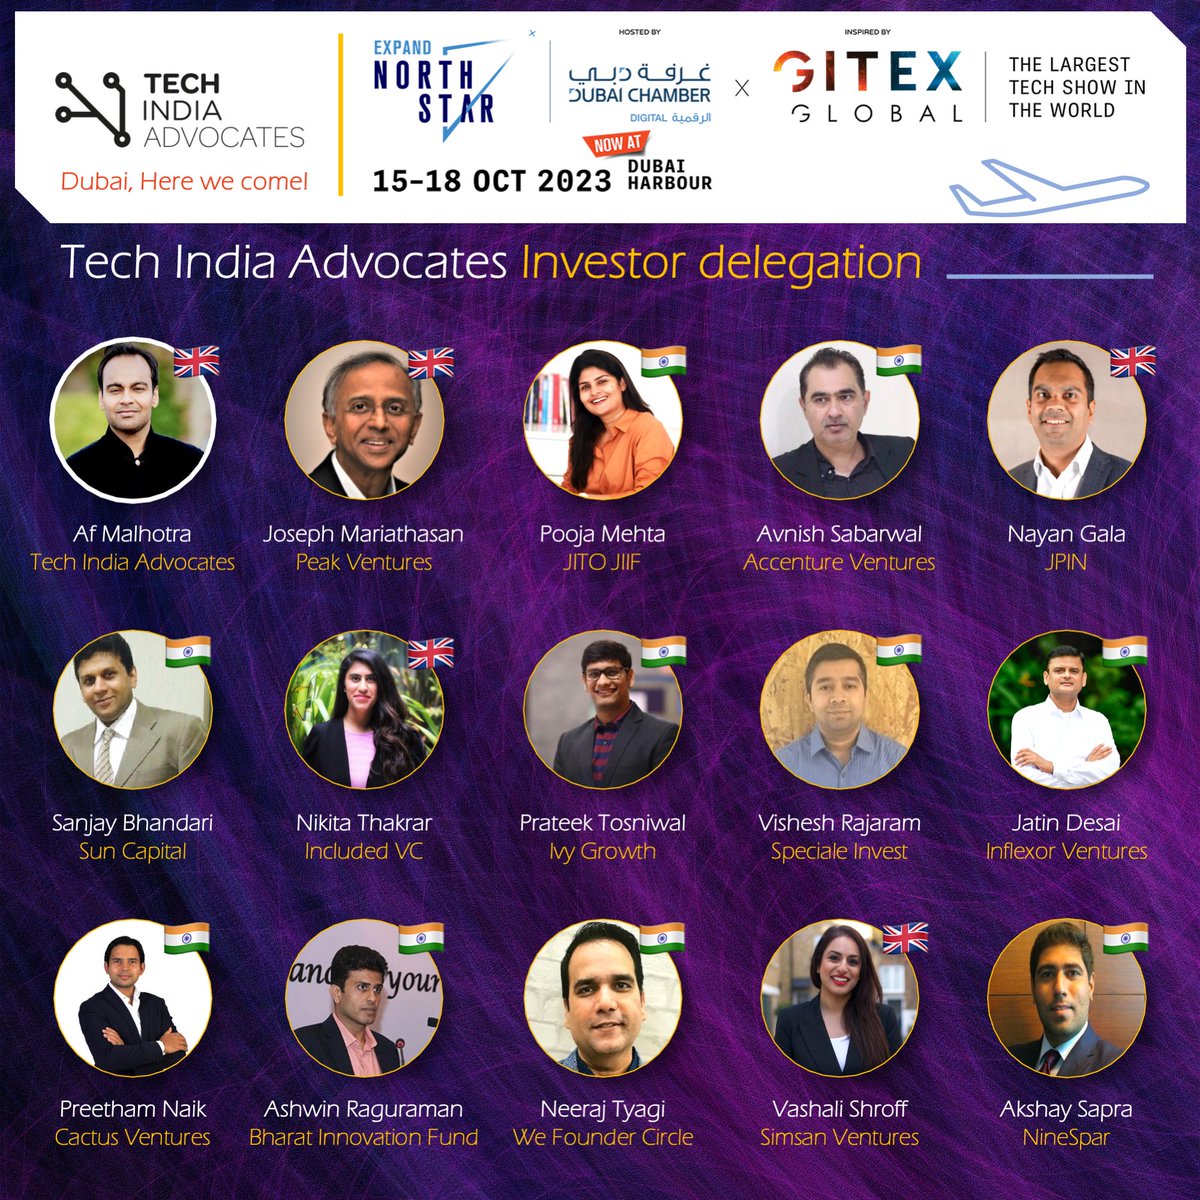 DUBAI, Here we come! 🇮🇳🇬🇧🛫 Excited to welcome an awesome TIA delegation of #VC #Investors from #UK #India TIA co-founder @AfMalhotra will be @GITEX_GLOBAL @expandnorthstar with fellow leaders from @GlobalTechAdv @TechLondonAdv See you in #Dubai Let's meet! ☕️ #GITEXGLOBAL